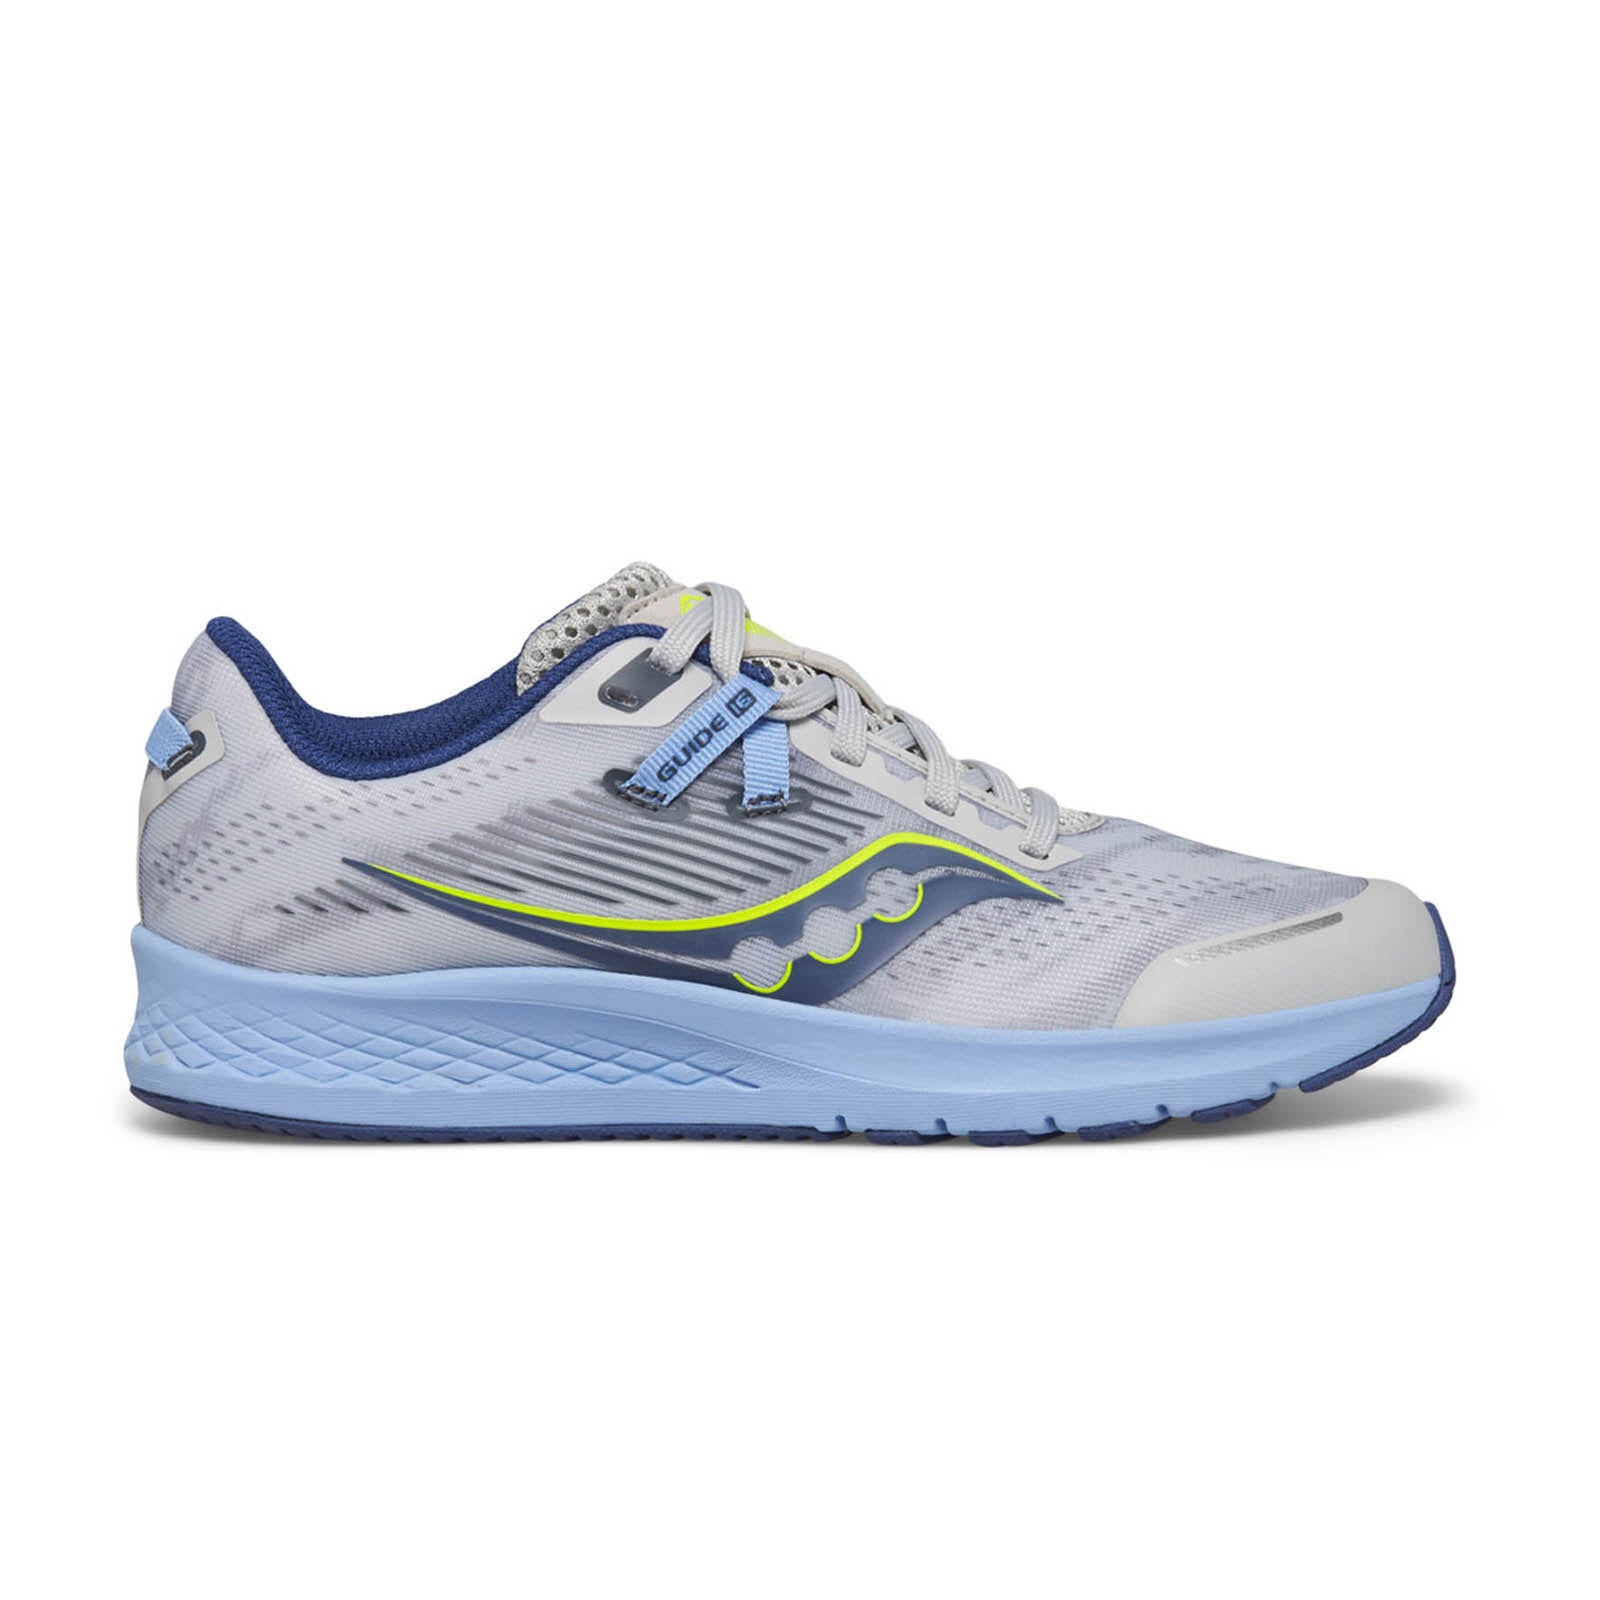 Side view of a light grey and blue Saucony Guide 16 running shoe with neon yellow accents on a white background.